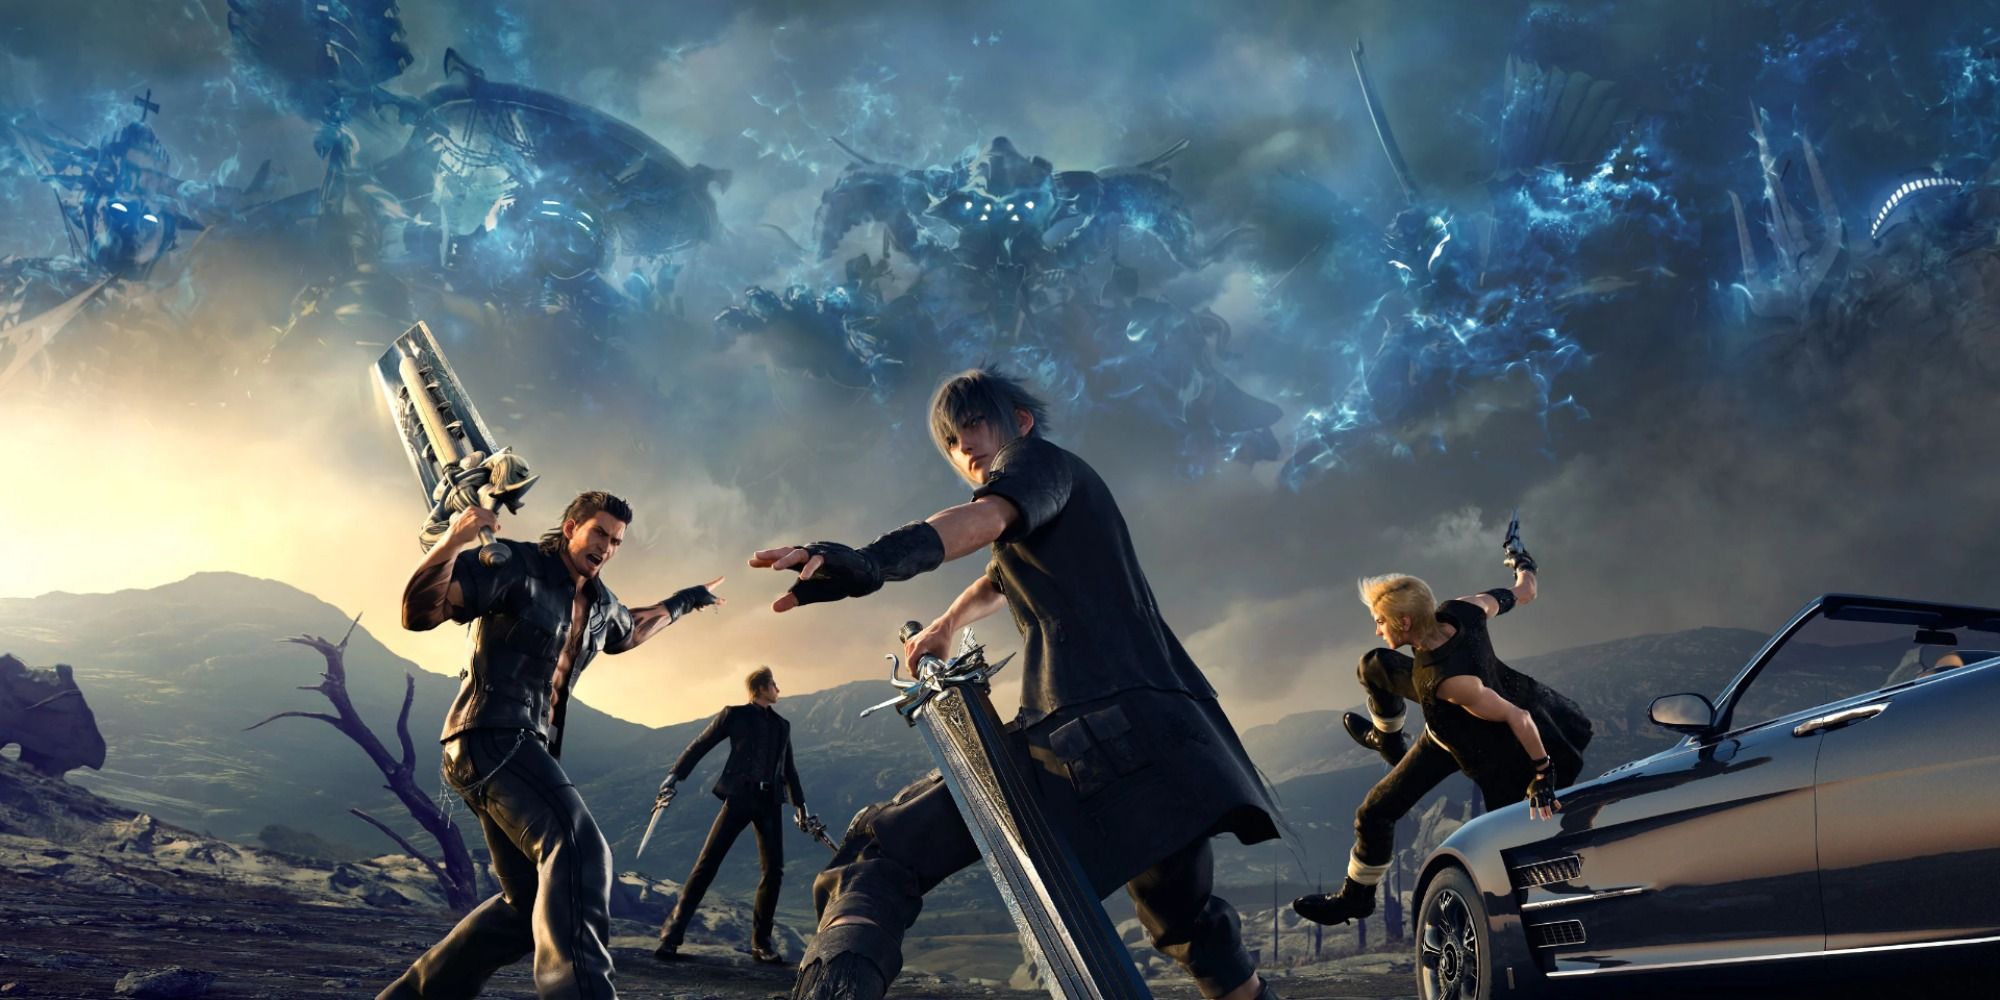 The main party of final fantasy 15 with their weapons drawn and the regalia in the background